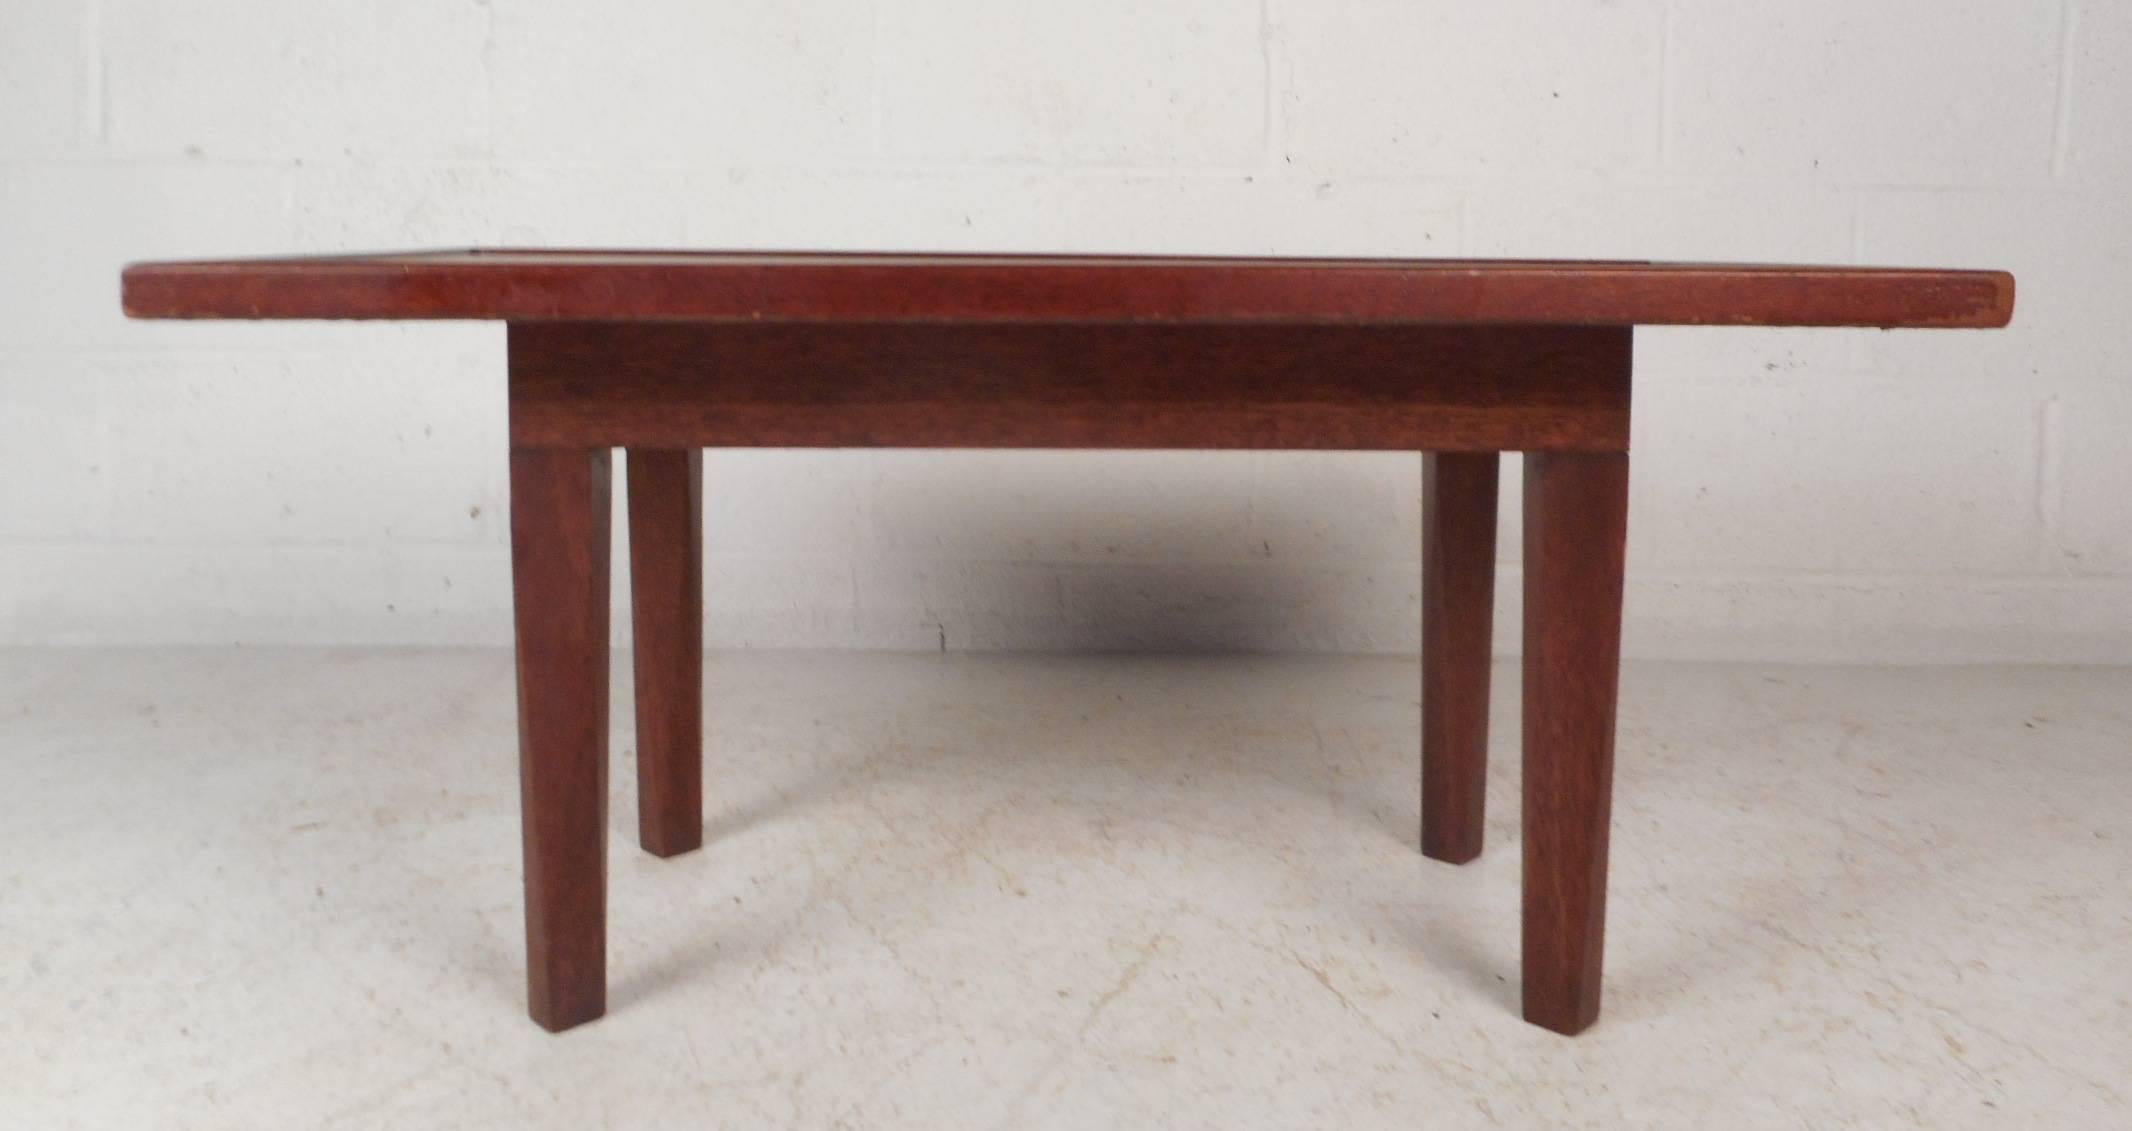 Fabulous vintage modern coffee table with raised edges around the top and long tapered legs. The unusual size of this piece allows it to function as a coffee table or an end table. The sleek and sturdy design features gorgeous dark walnut wood grain